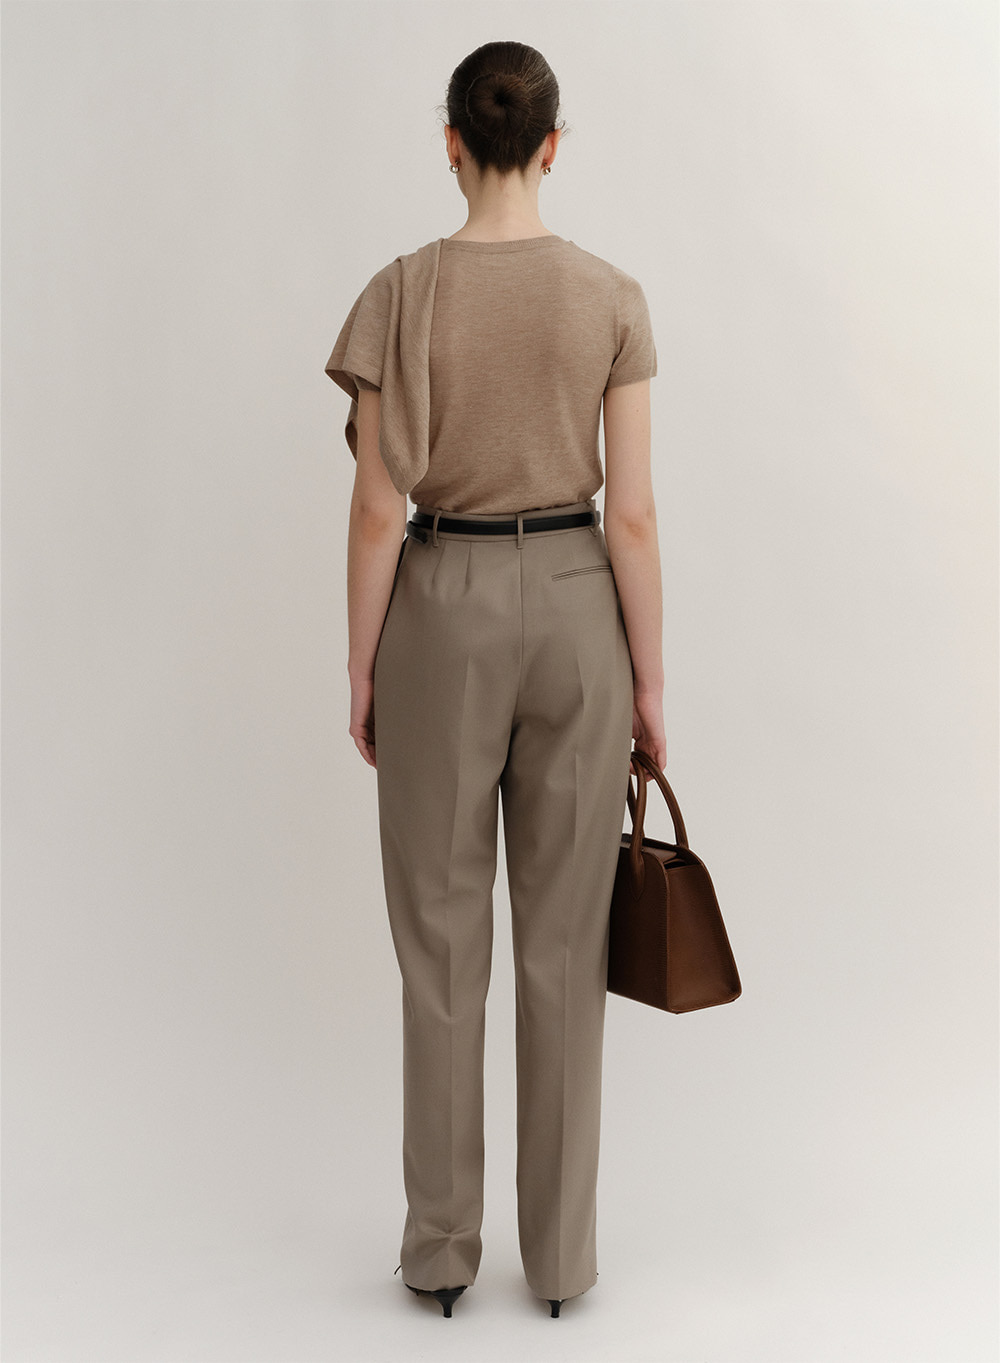 SS24 Ariel Taupe Pants